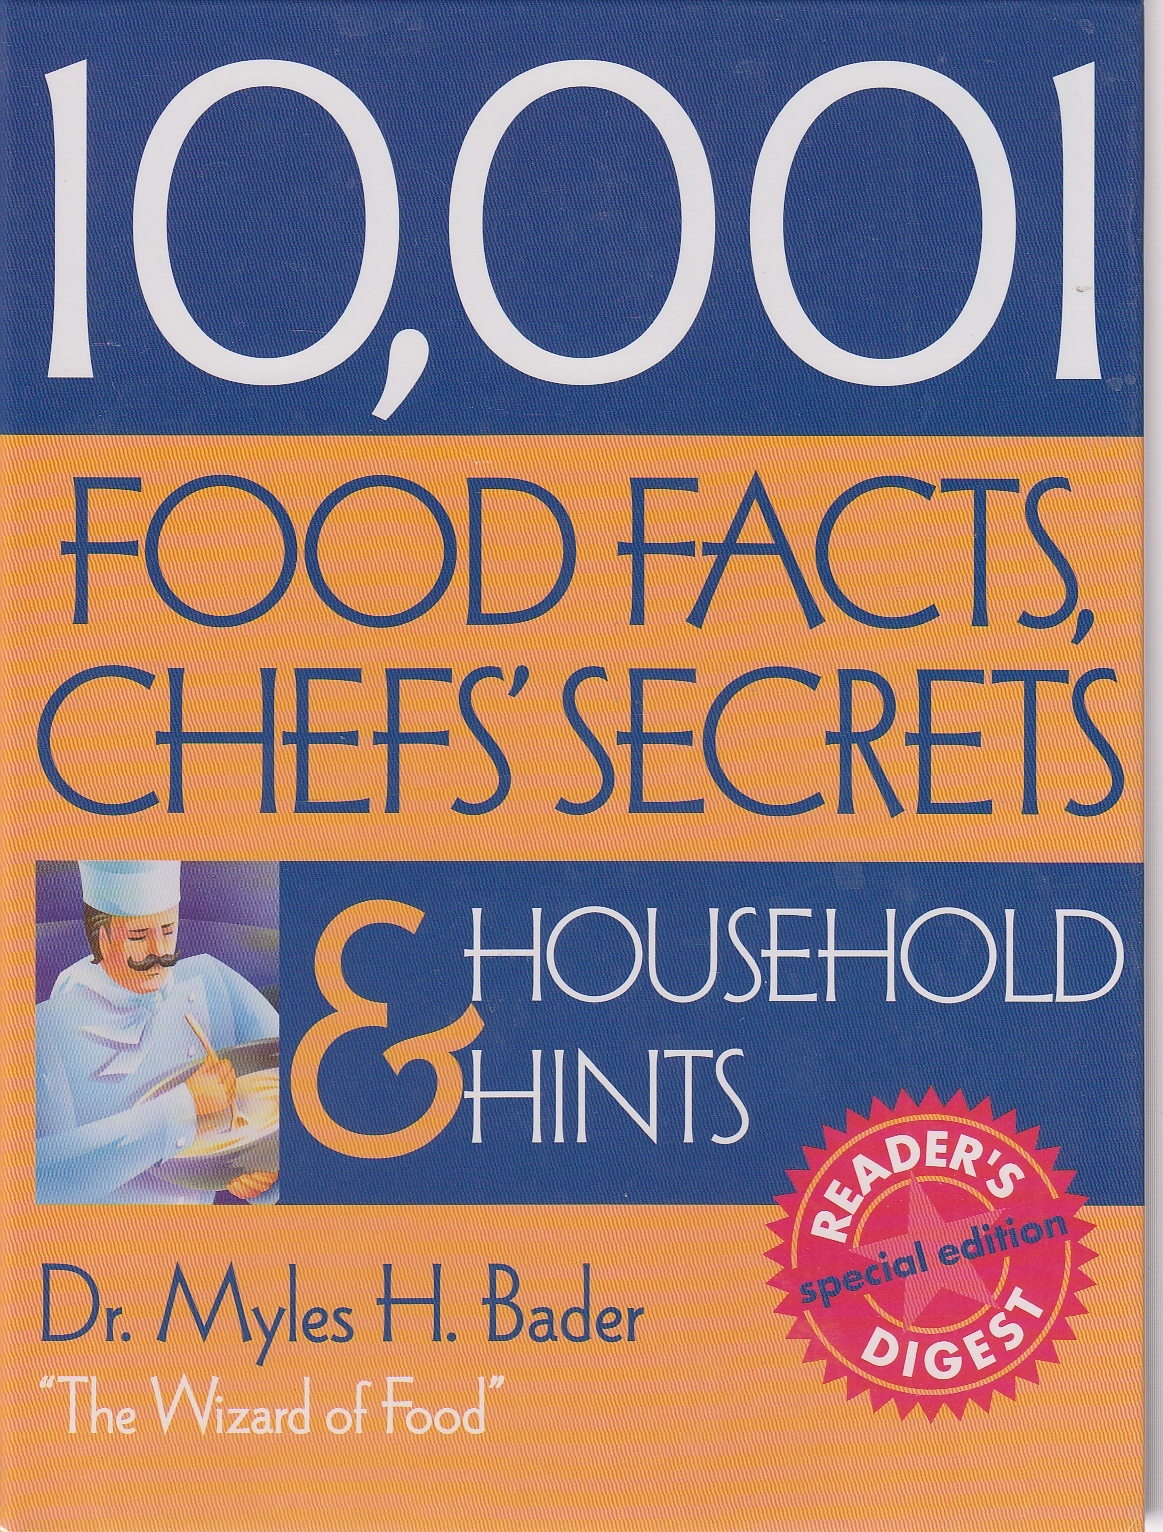 Image for 10,001 Food Facts, Chefs' Secrets, and Household Hints